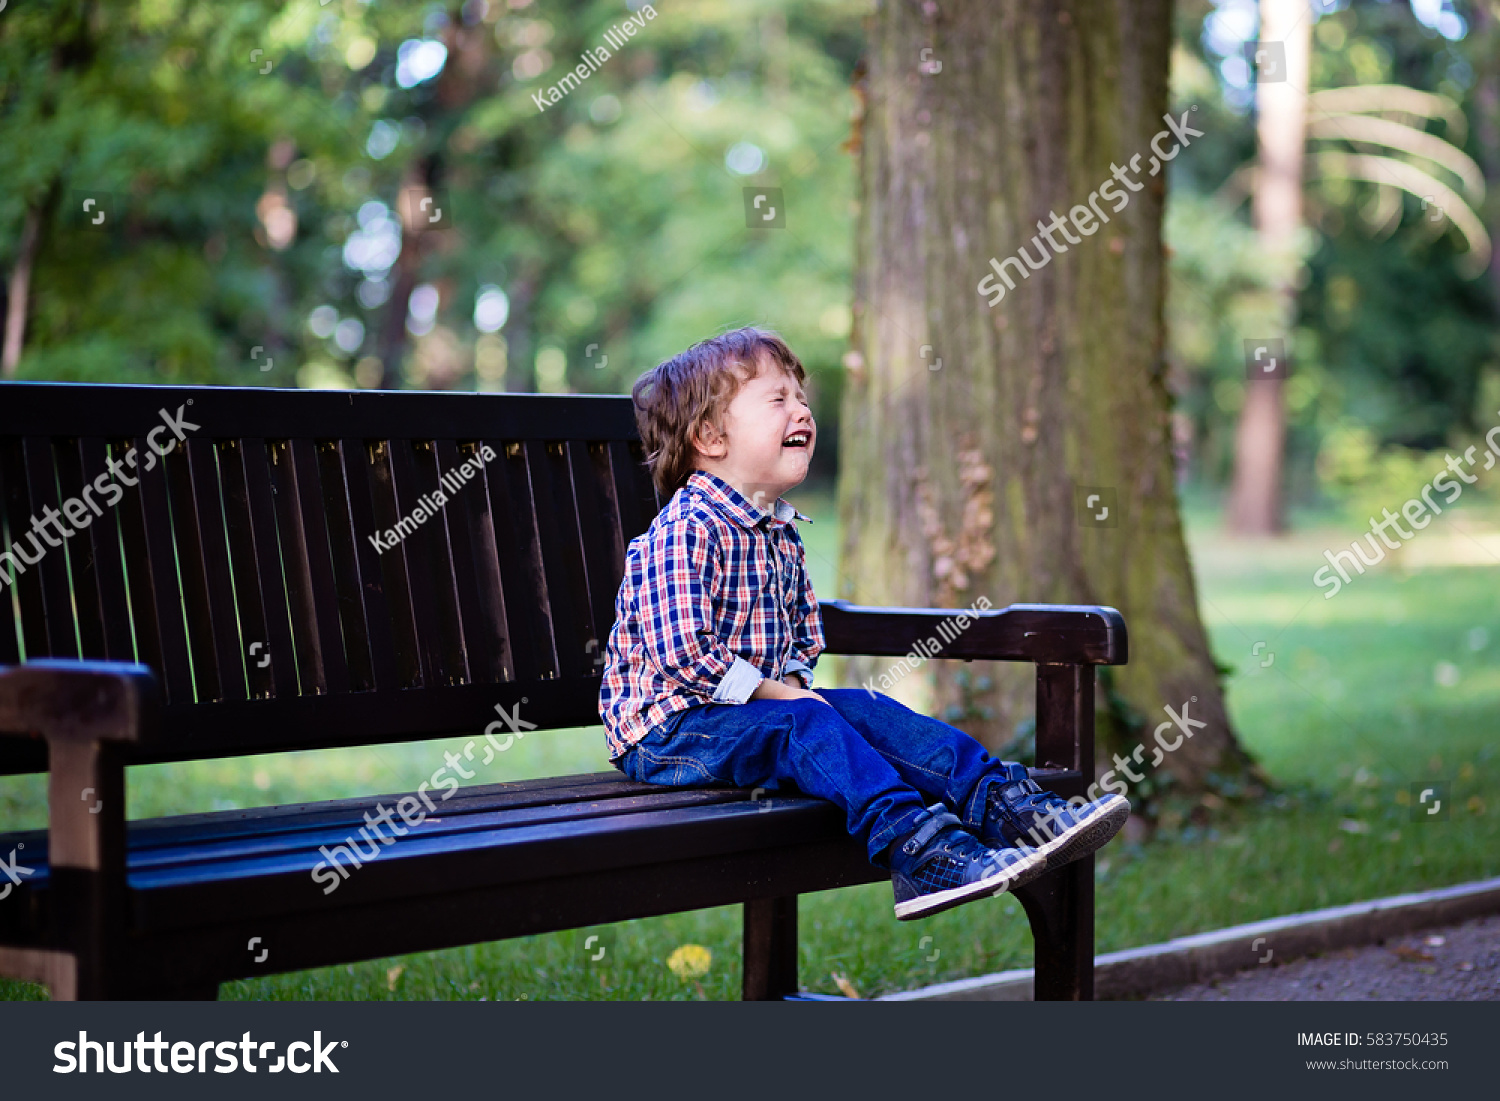 Upset little baby boy crying outdoors. Toddler having tantrum in the park #583750435